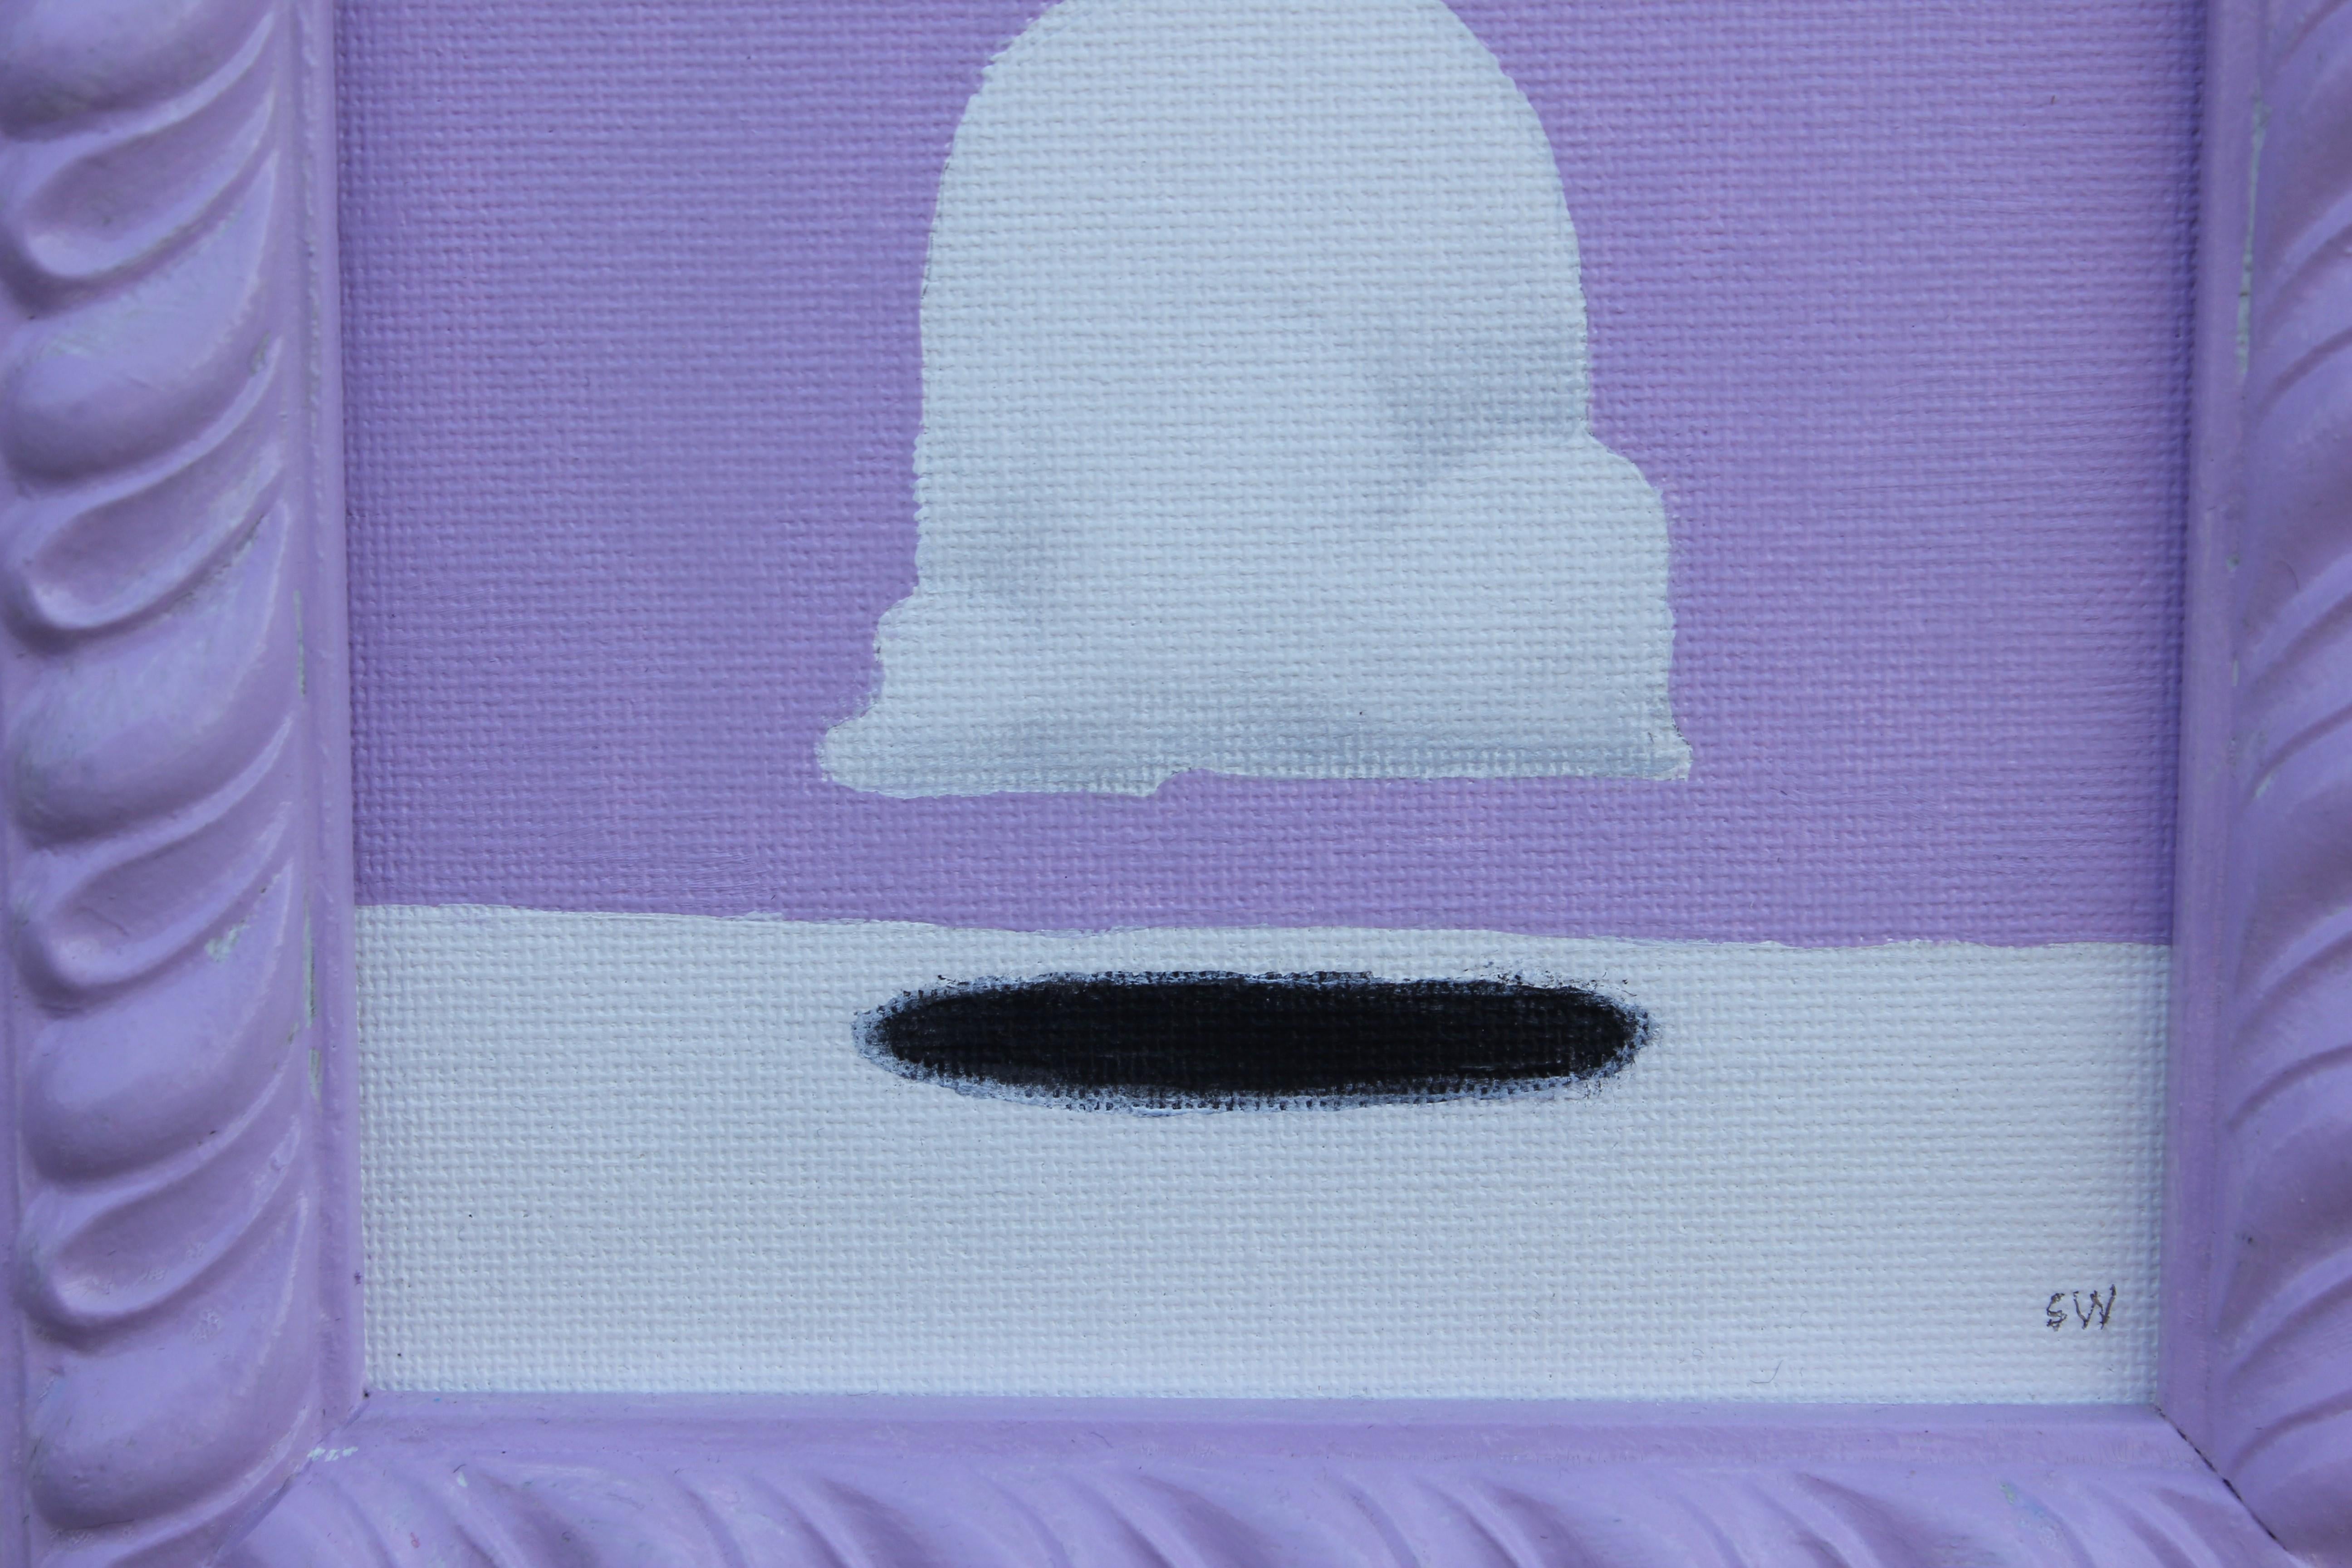 Cloud with Dot - Painting by Scott Woodard